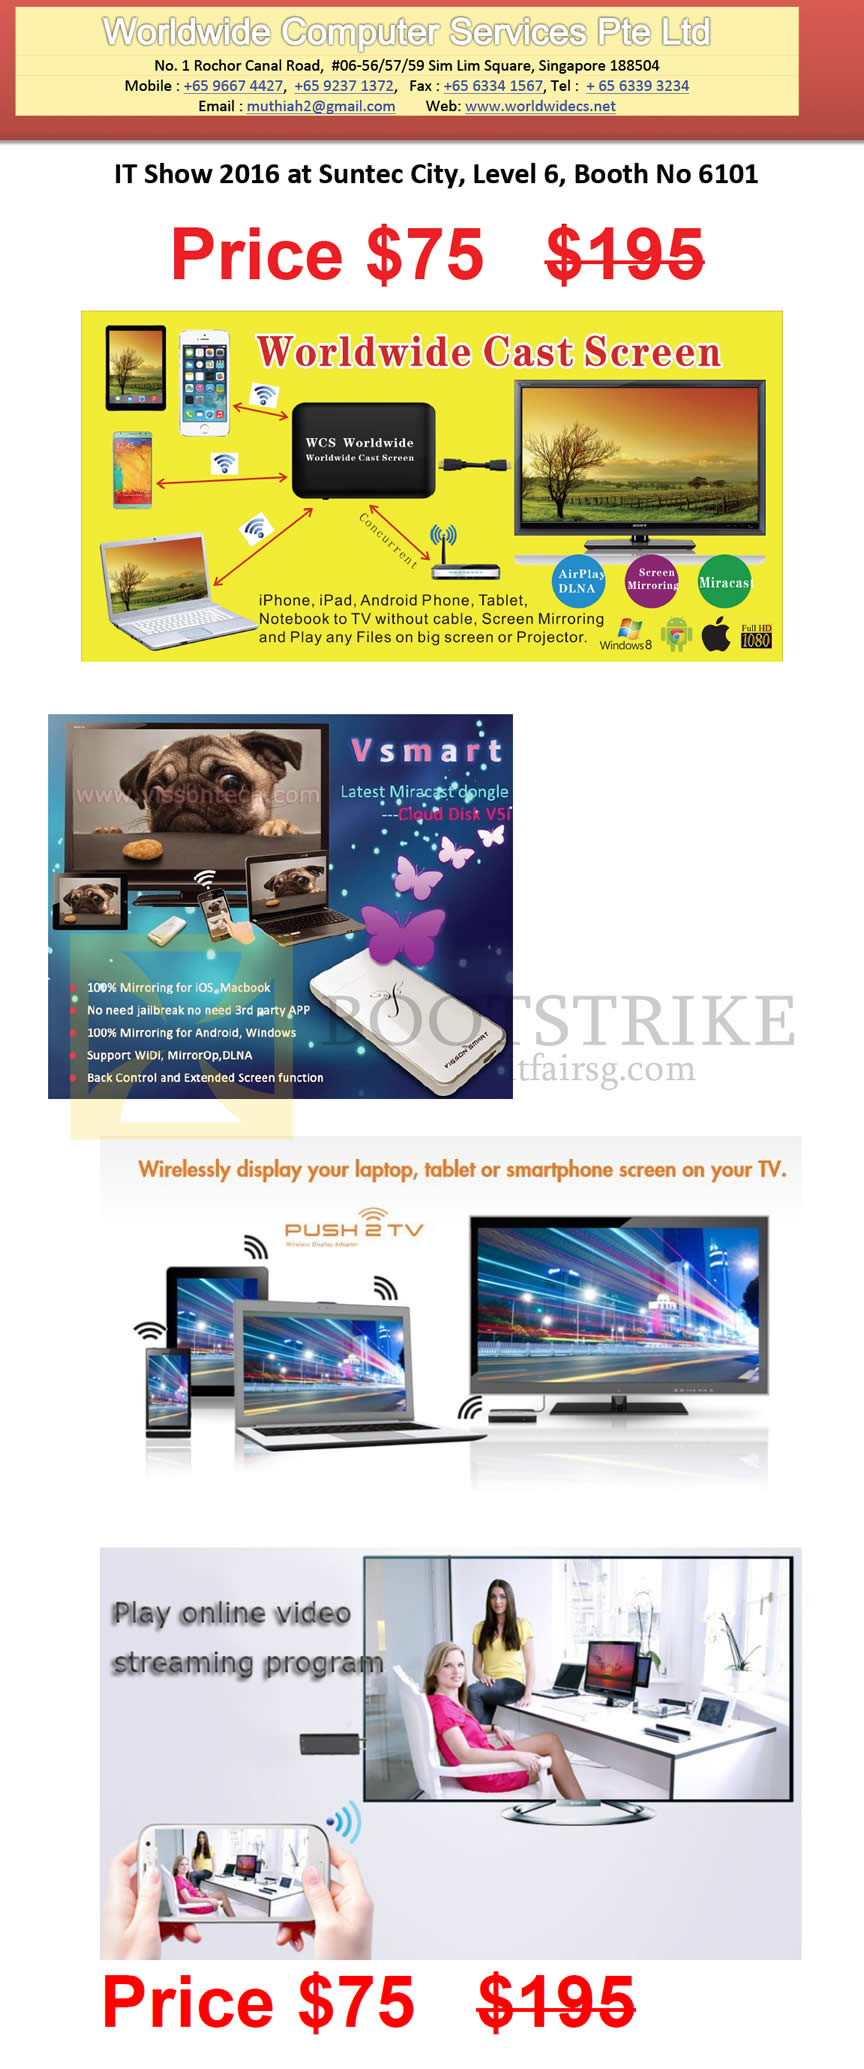 IT SHOW 2016 price list image brochure of Worldwide Computer Services Cast Screen Vsmart Dongle